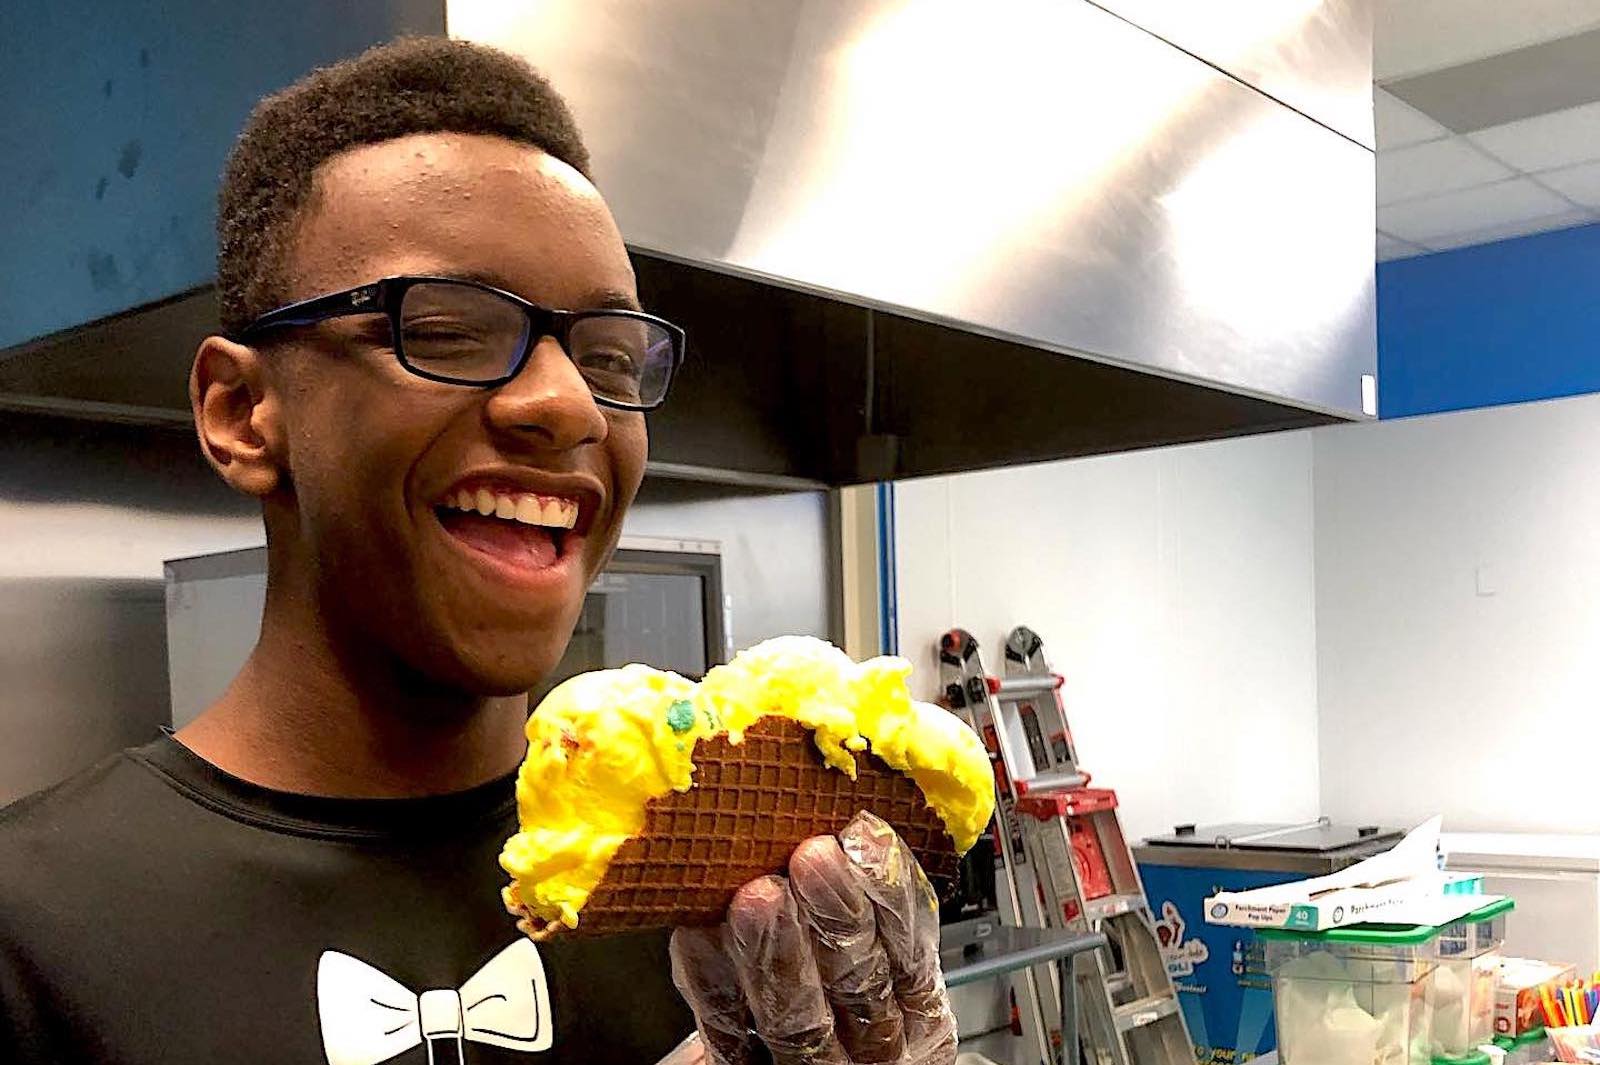 Meet the 15-Year-Old Who Went From an Ice Cream Cart to an Ice Cream Parlor | Black Enterprise